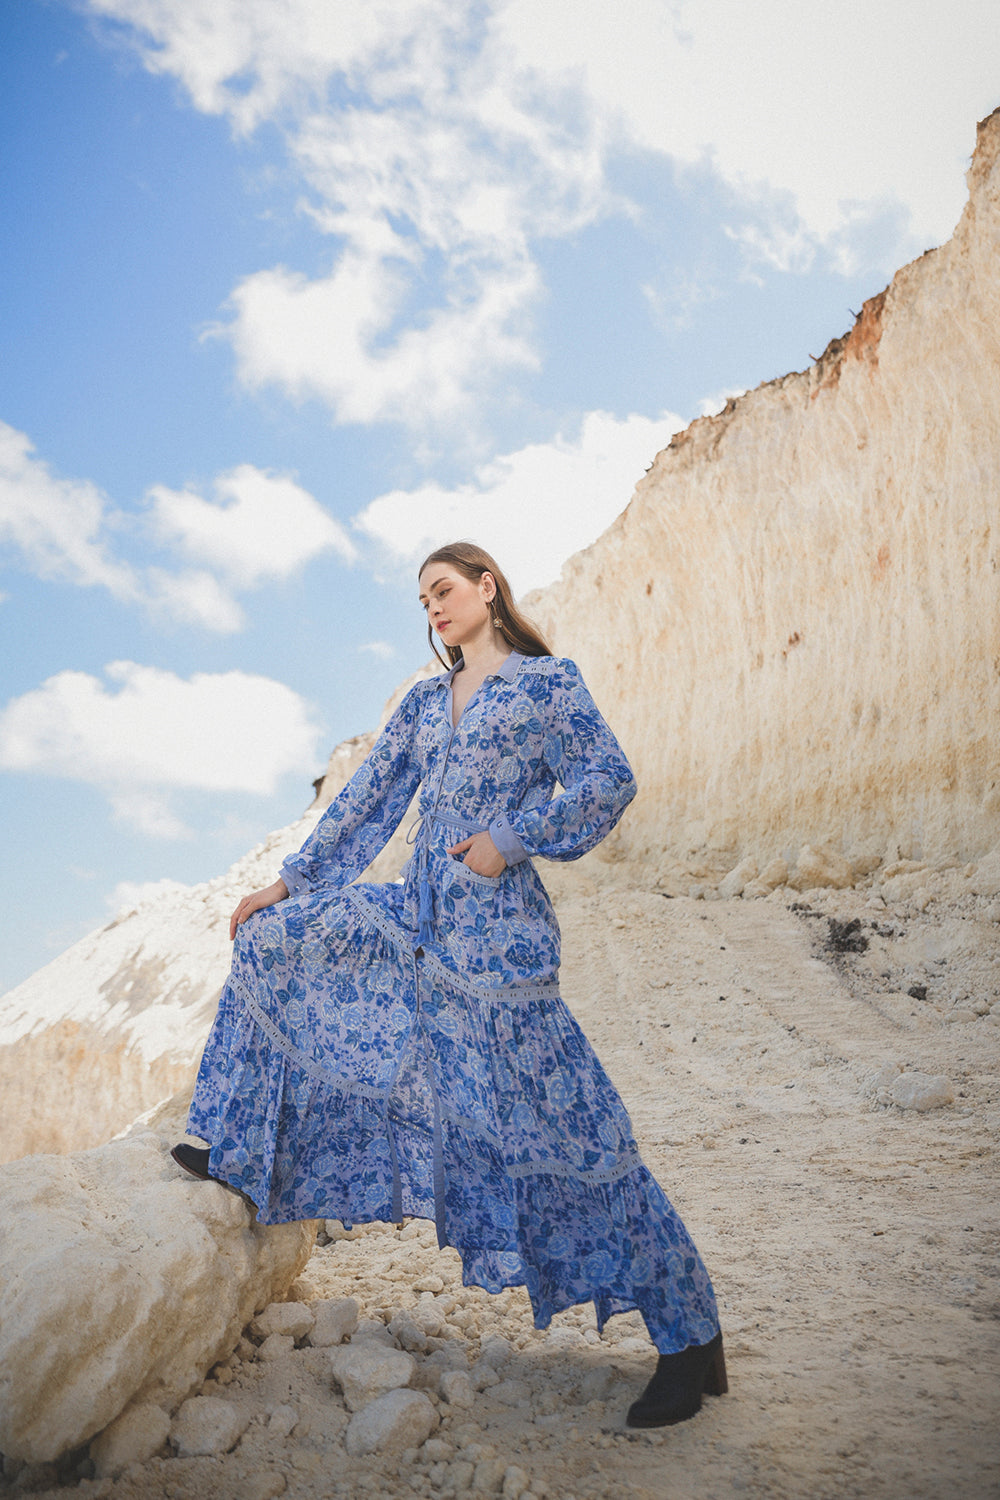 Immerse yourself in the world of slow fashion with Tulle and Batiste. Ethically made clothing you'll want to keep forever. Discover artisan made clothing embodying the boho spirit. Enjoy free shipping and hassle free returns.